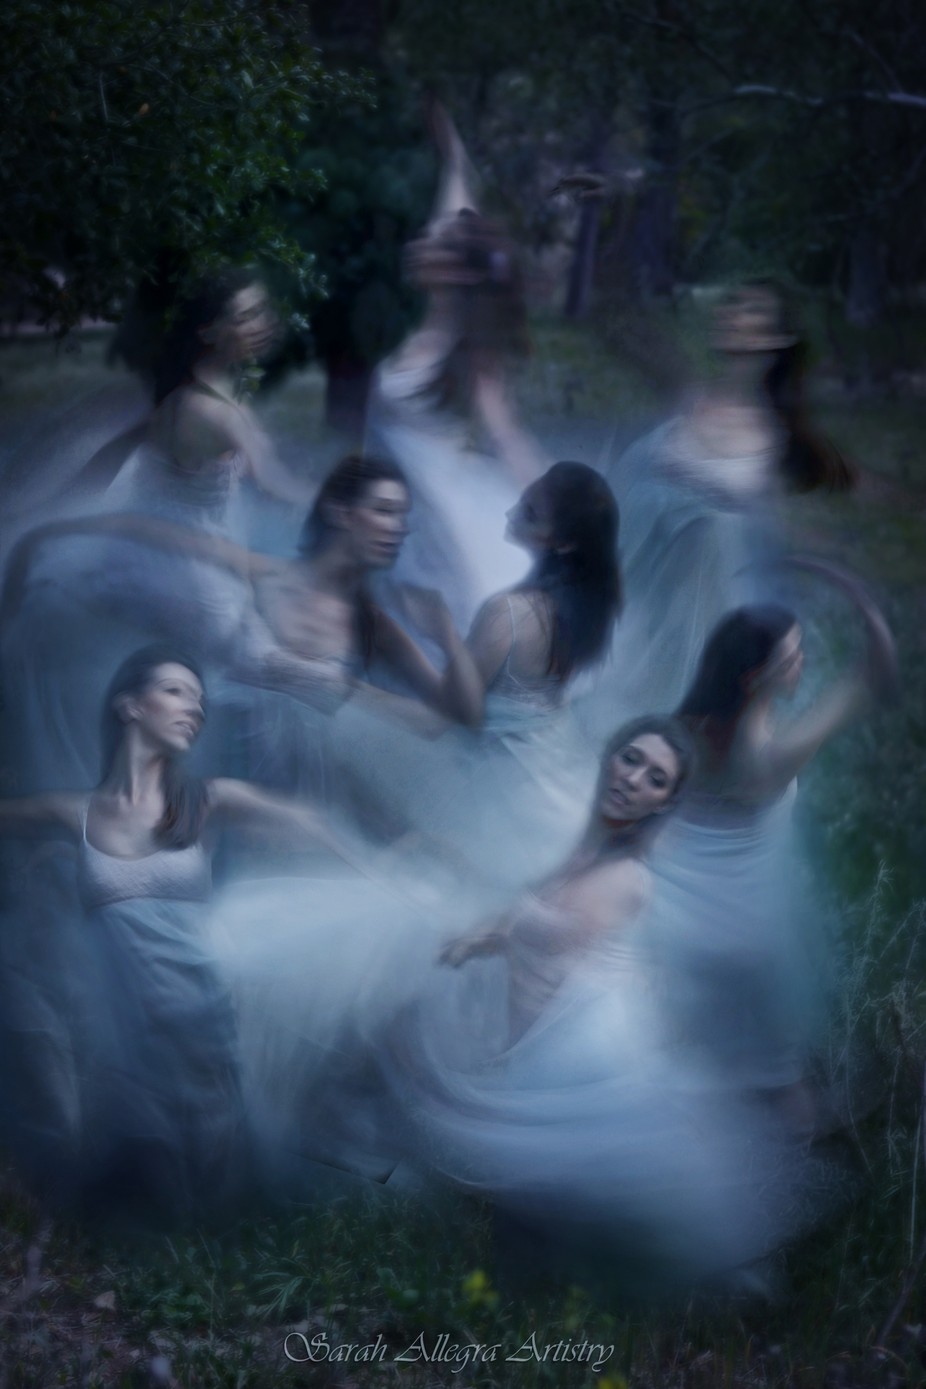 Again Throughout Eternity by sarahallegra - Ballerinas And Dancers Photo Contest